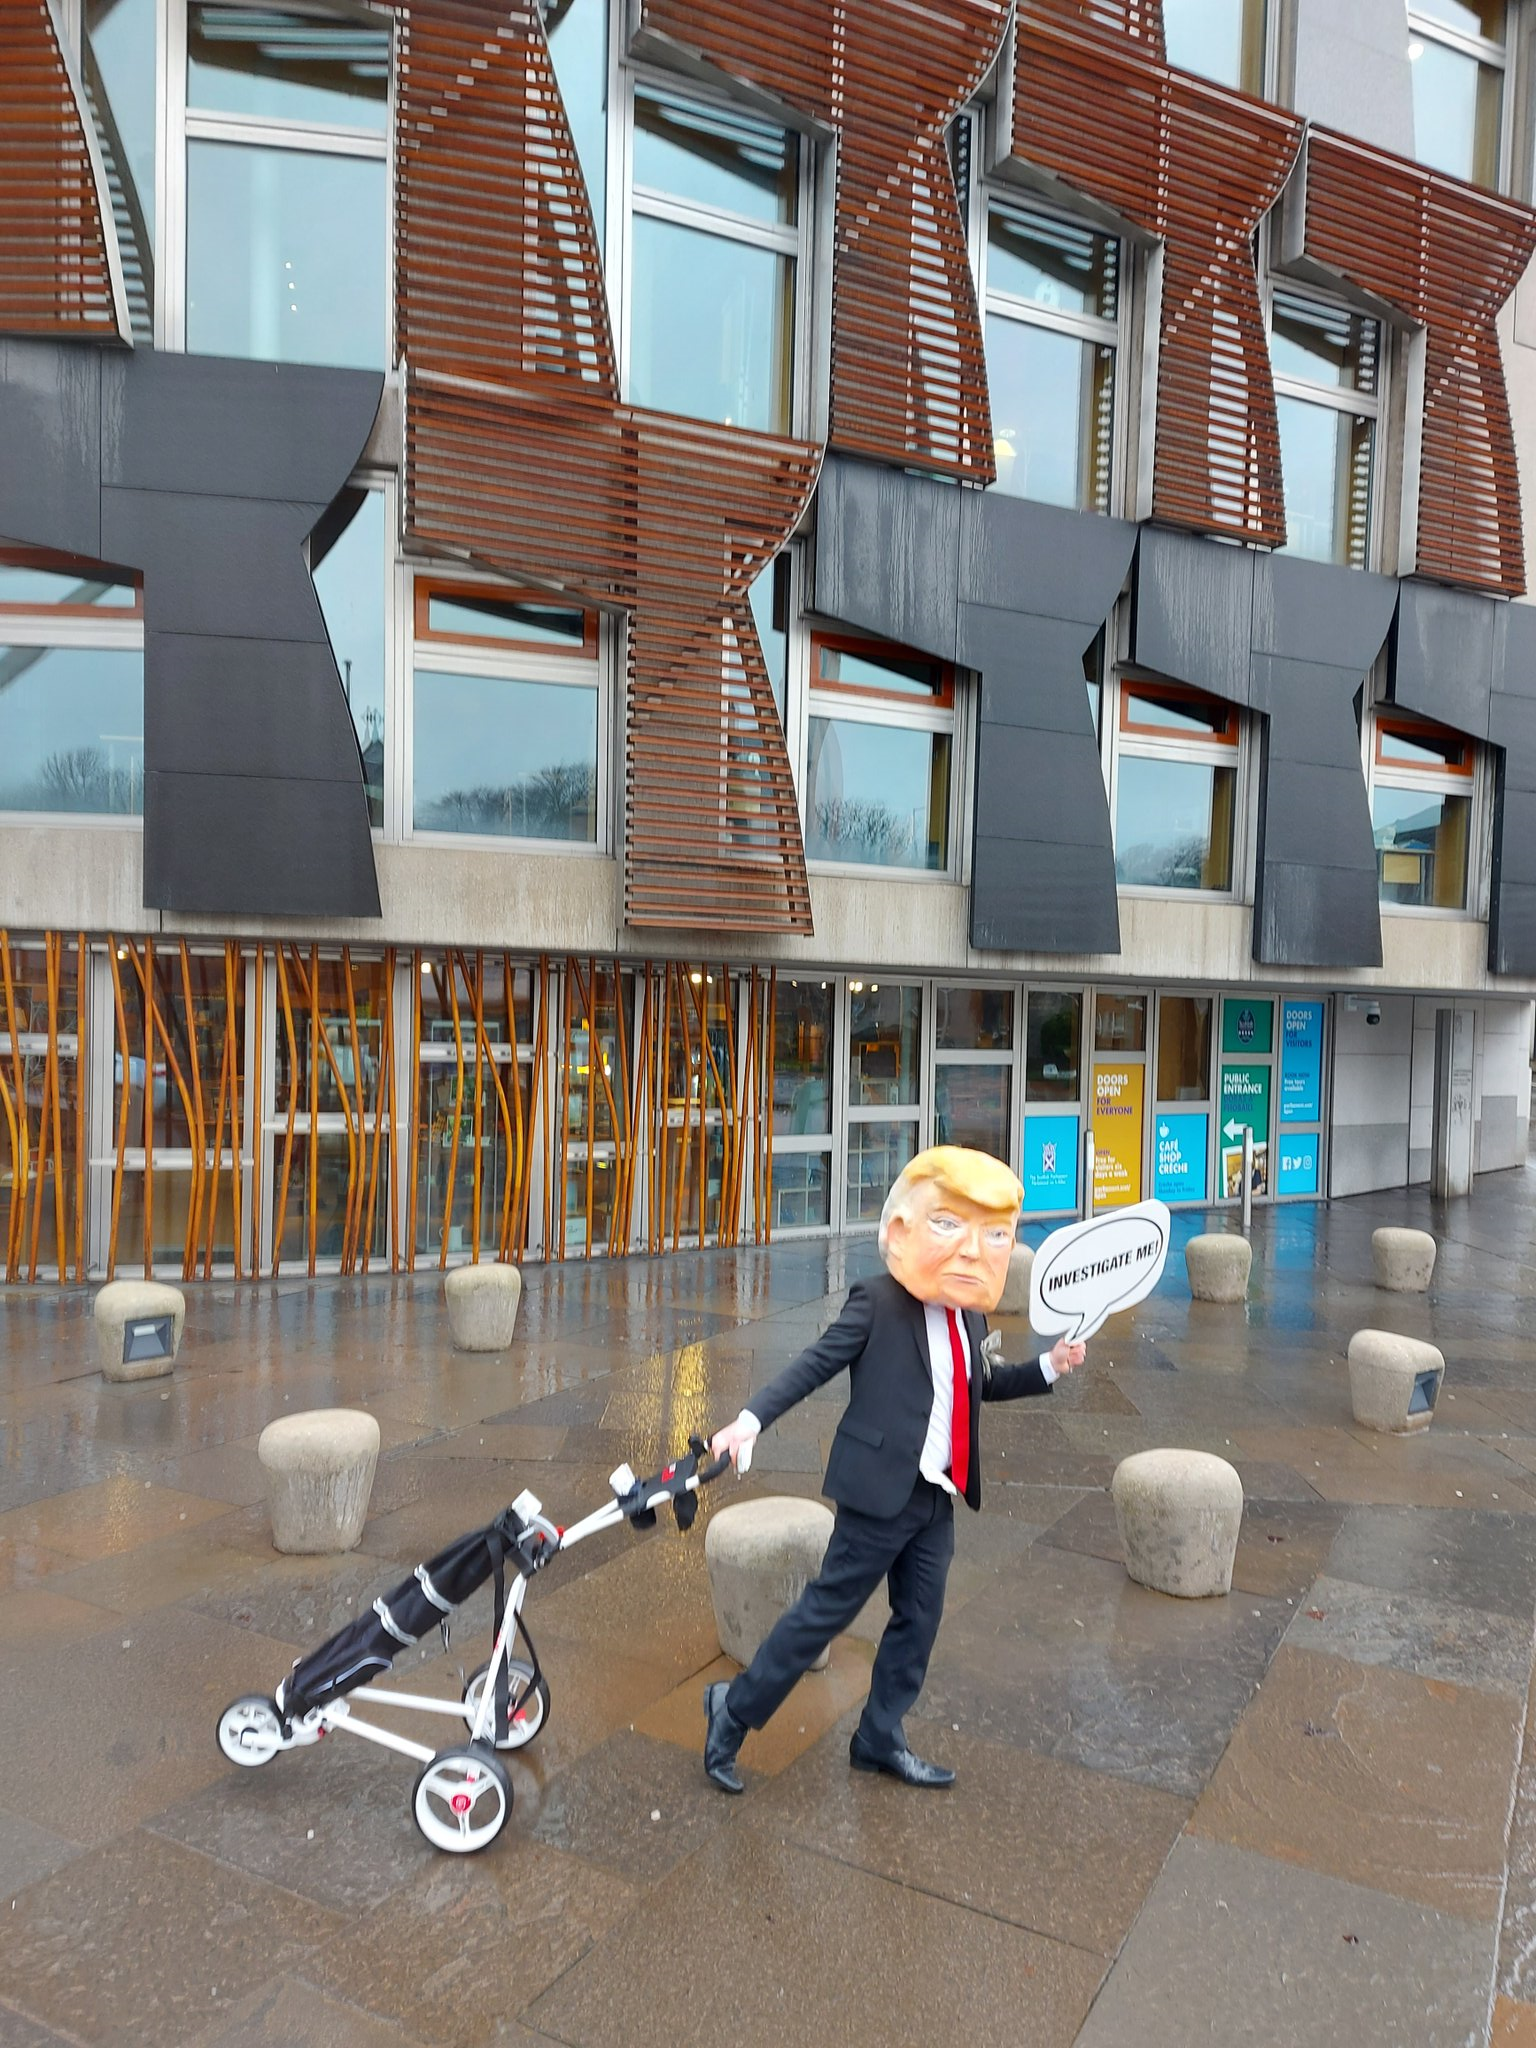 A protestor outside Holyrood ahead of the debate on Wednesday, February 3. Credit: Kirsty Haigh